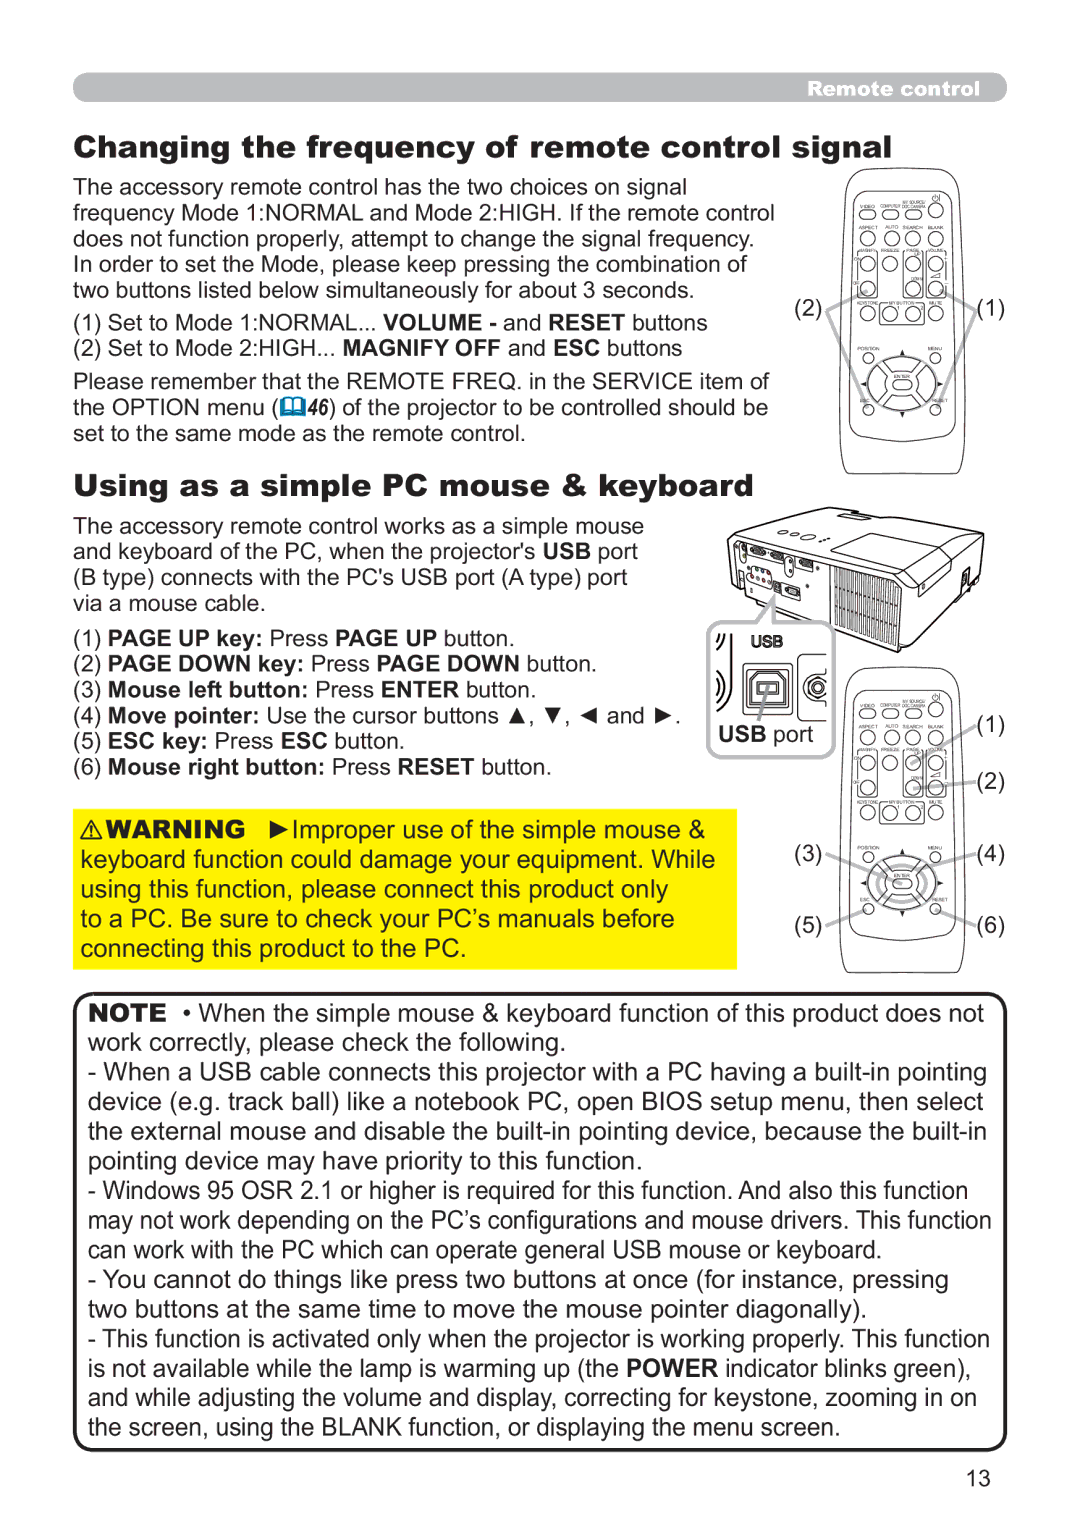 Hitachi CP-X3010Z, CP-X2011 Changing the frequency of remote control signal, Using as a simple PC mouse & keyboard 